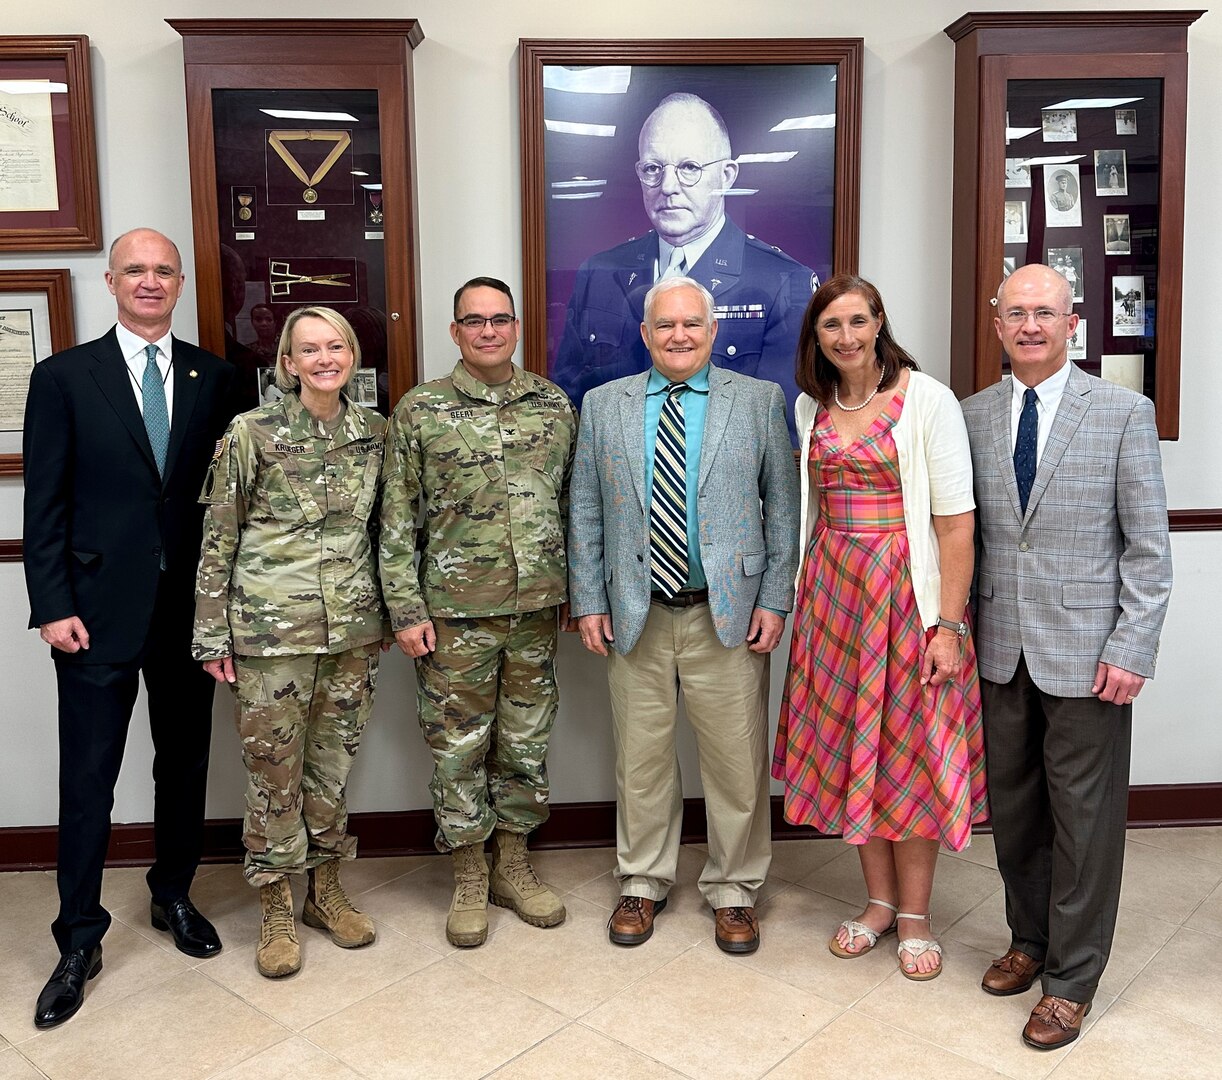 Winn Army Community Hospital celebrated 40 years of community partnership and service to Soldiers, retirees and their families during an anniversary event, May 22 on Fort Stewart.